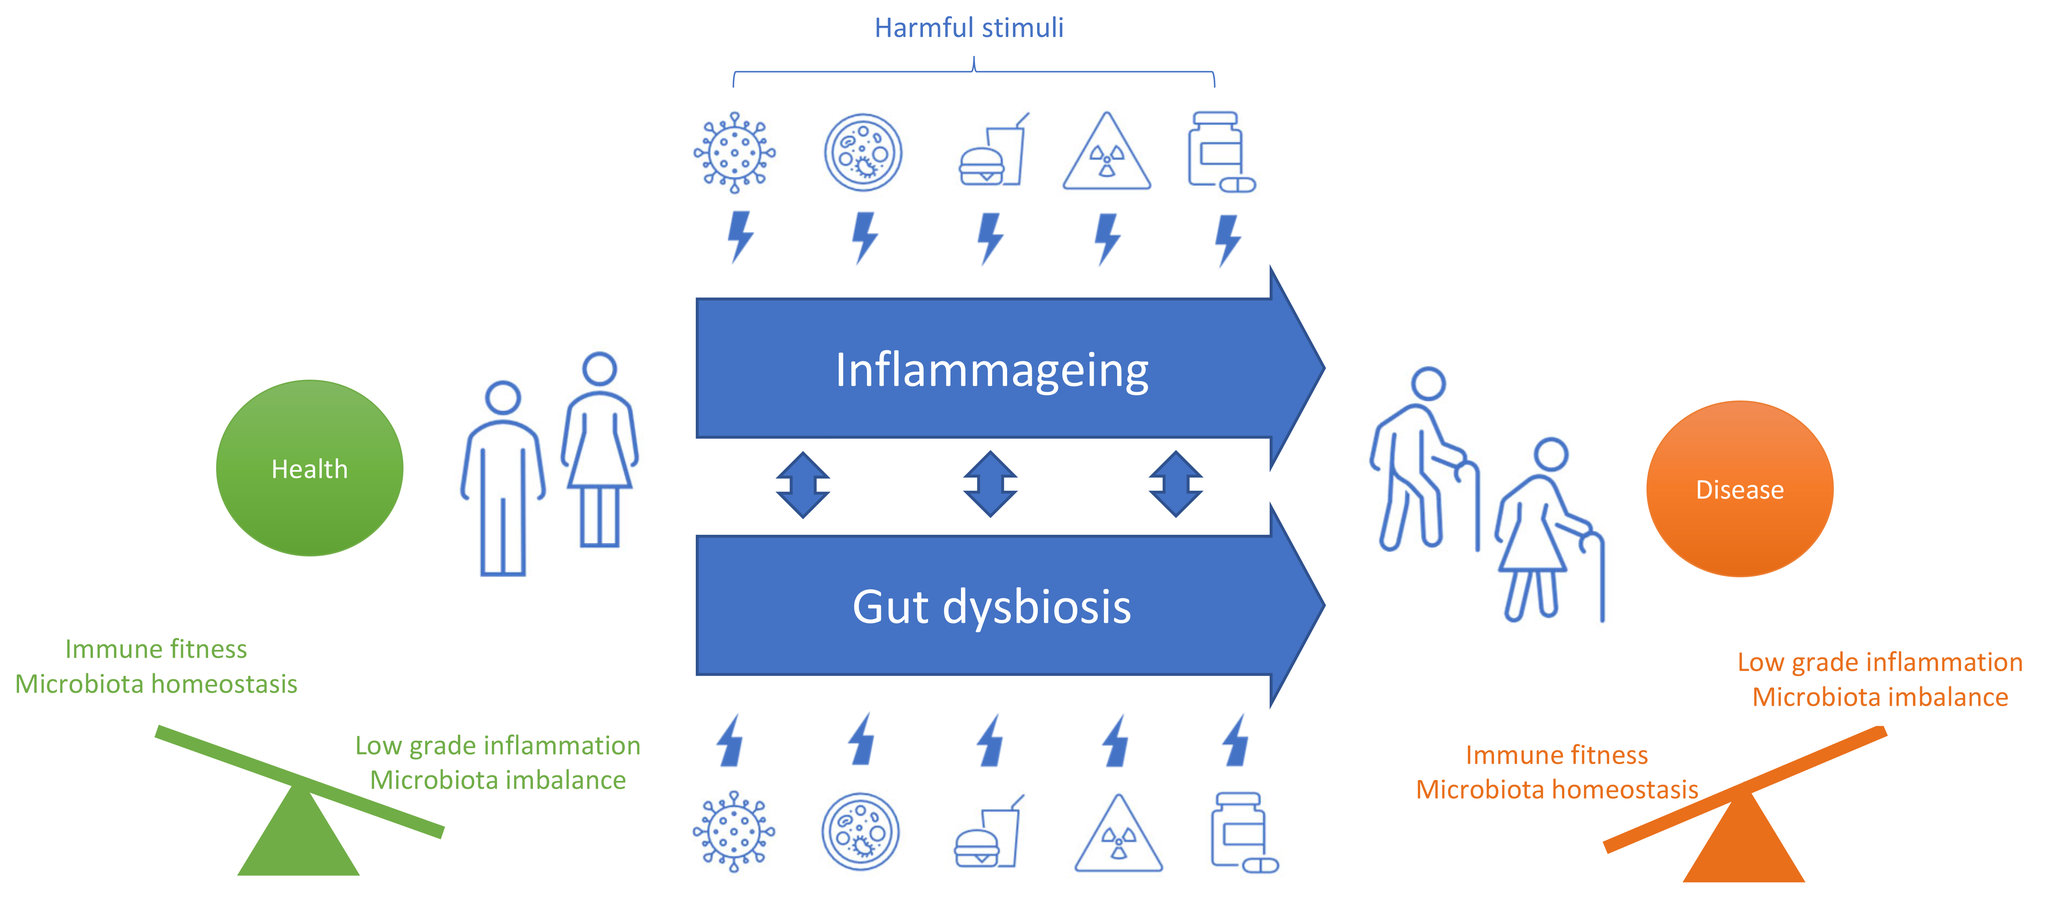 The ageing process: a lifelong adaptive response to harmful stimuli leading to inflammageing and gut dysbiosis.